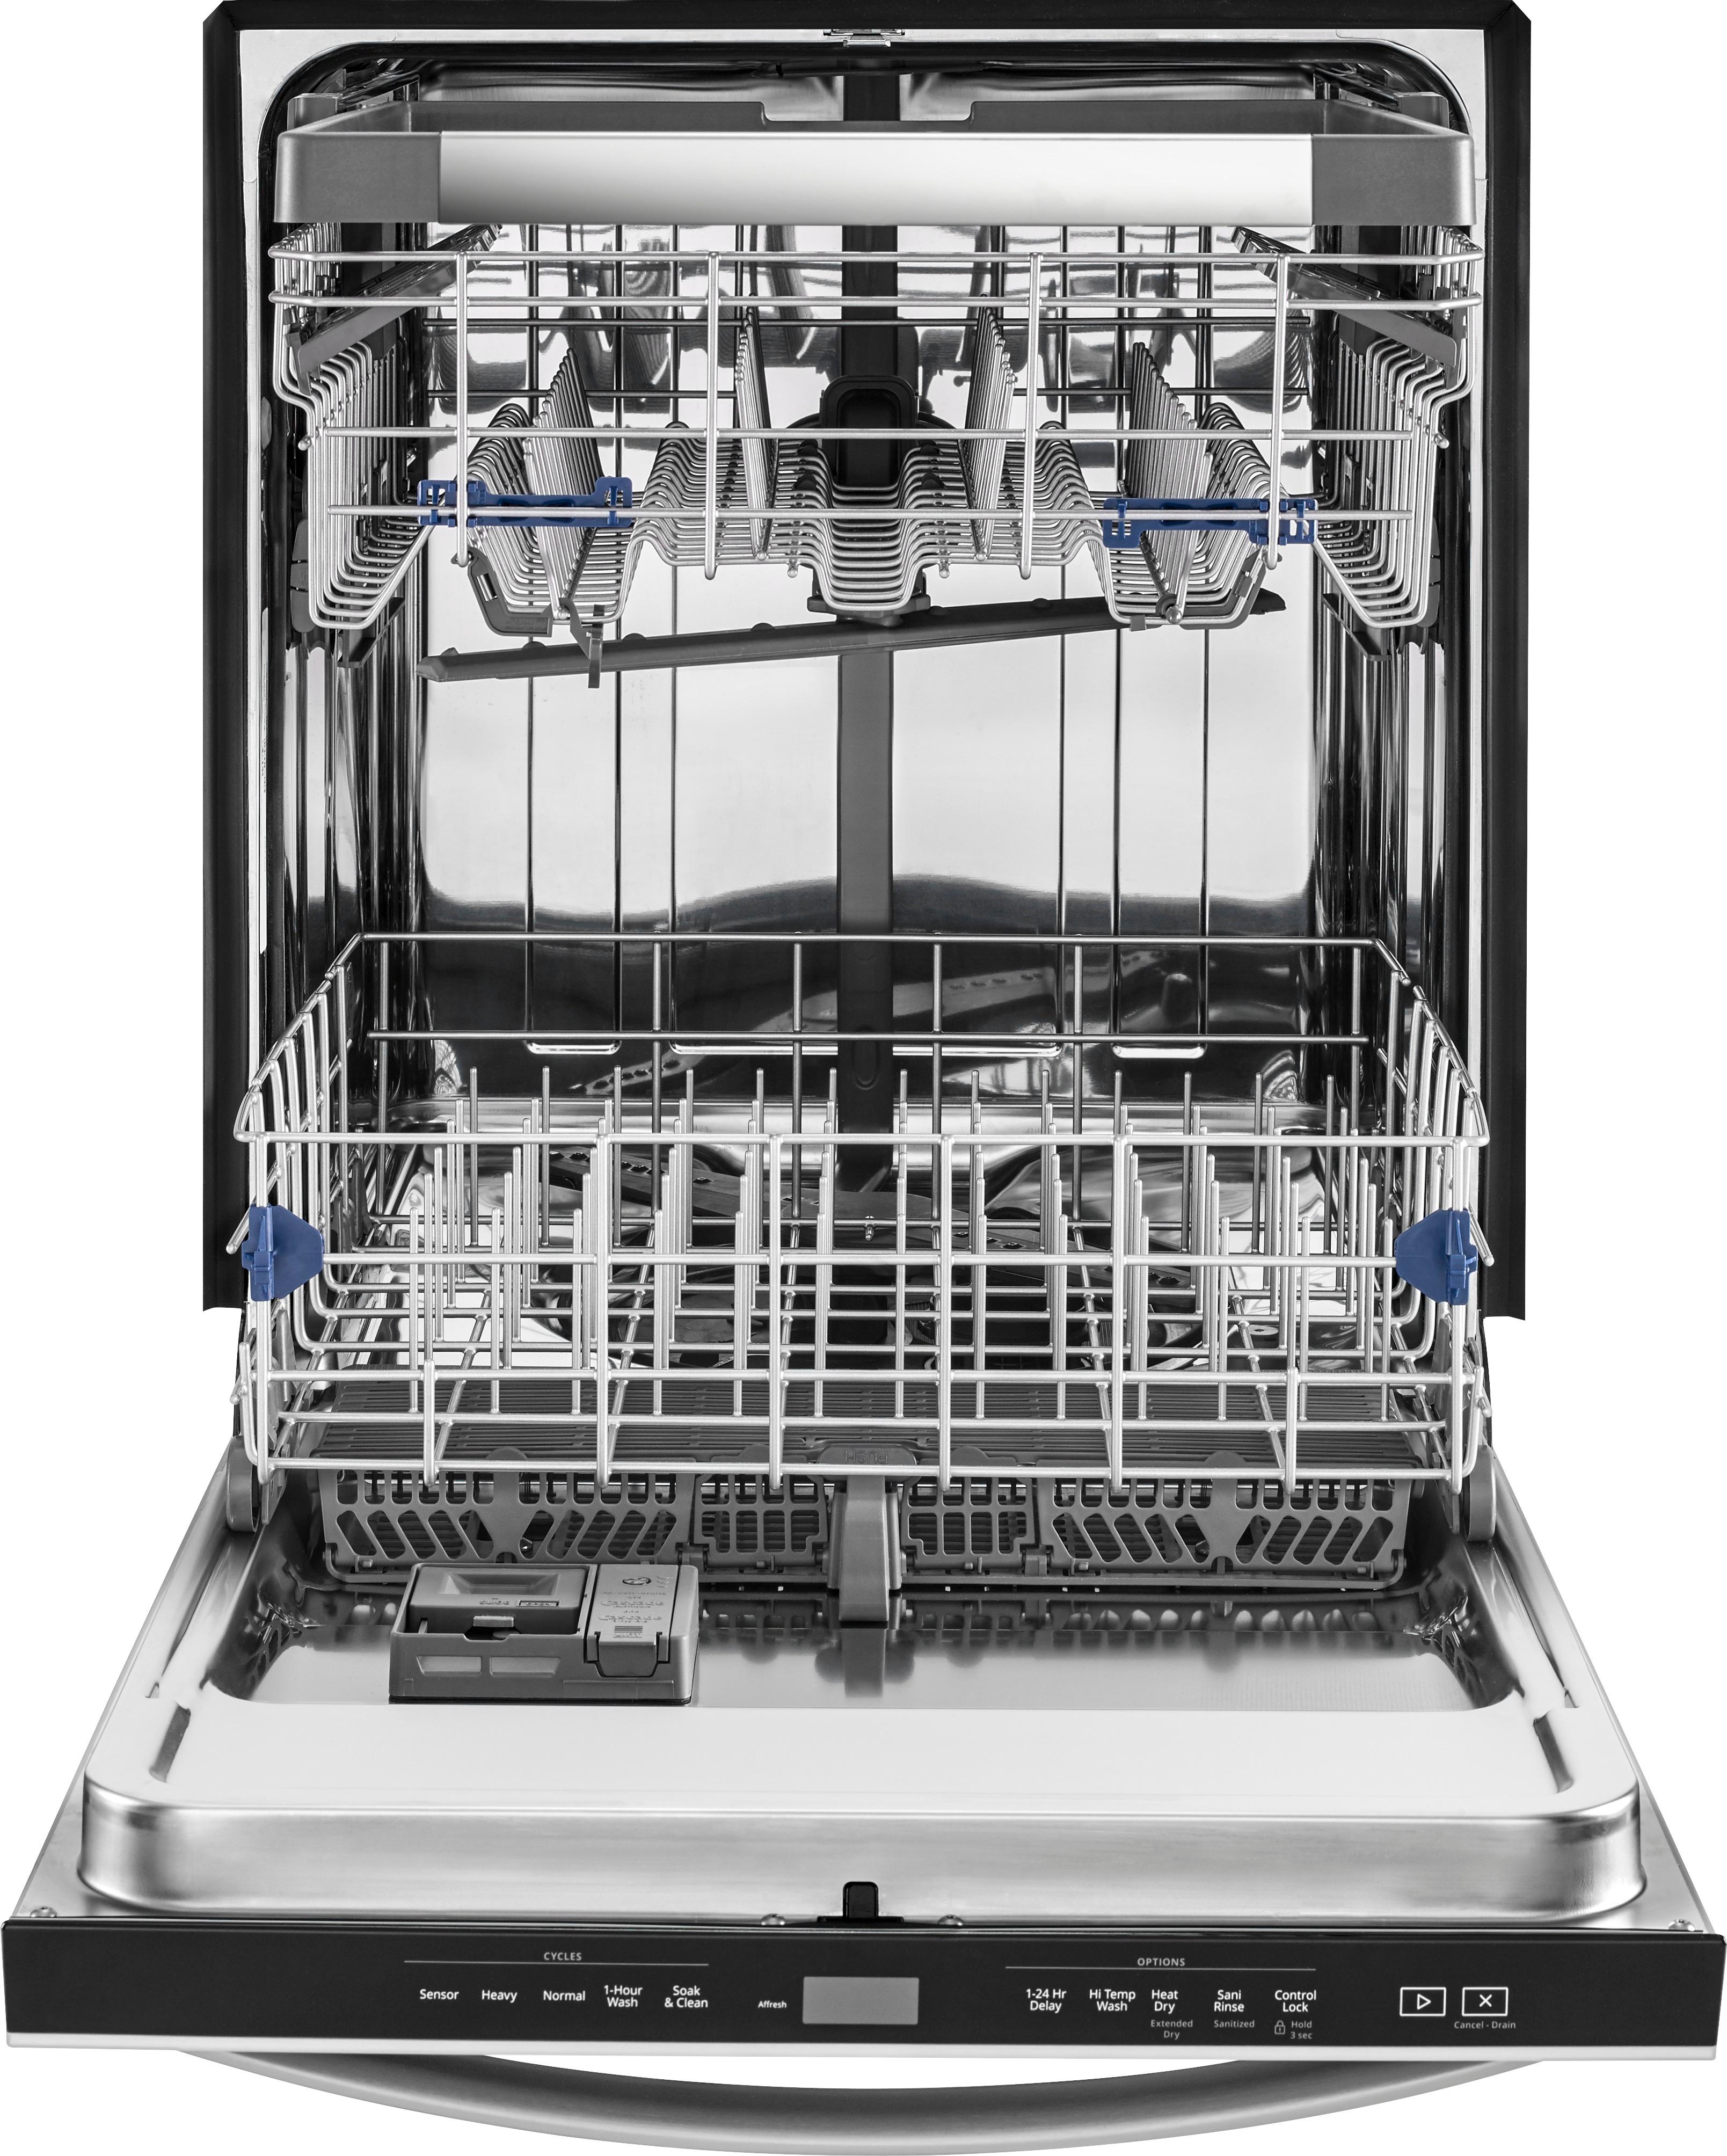 Angle View: Whirlpool - 24" Built-In Dishwasher - Stainless steel